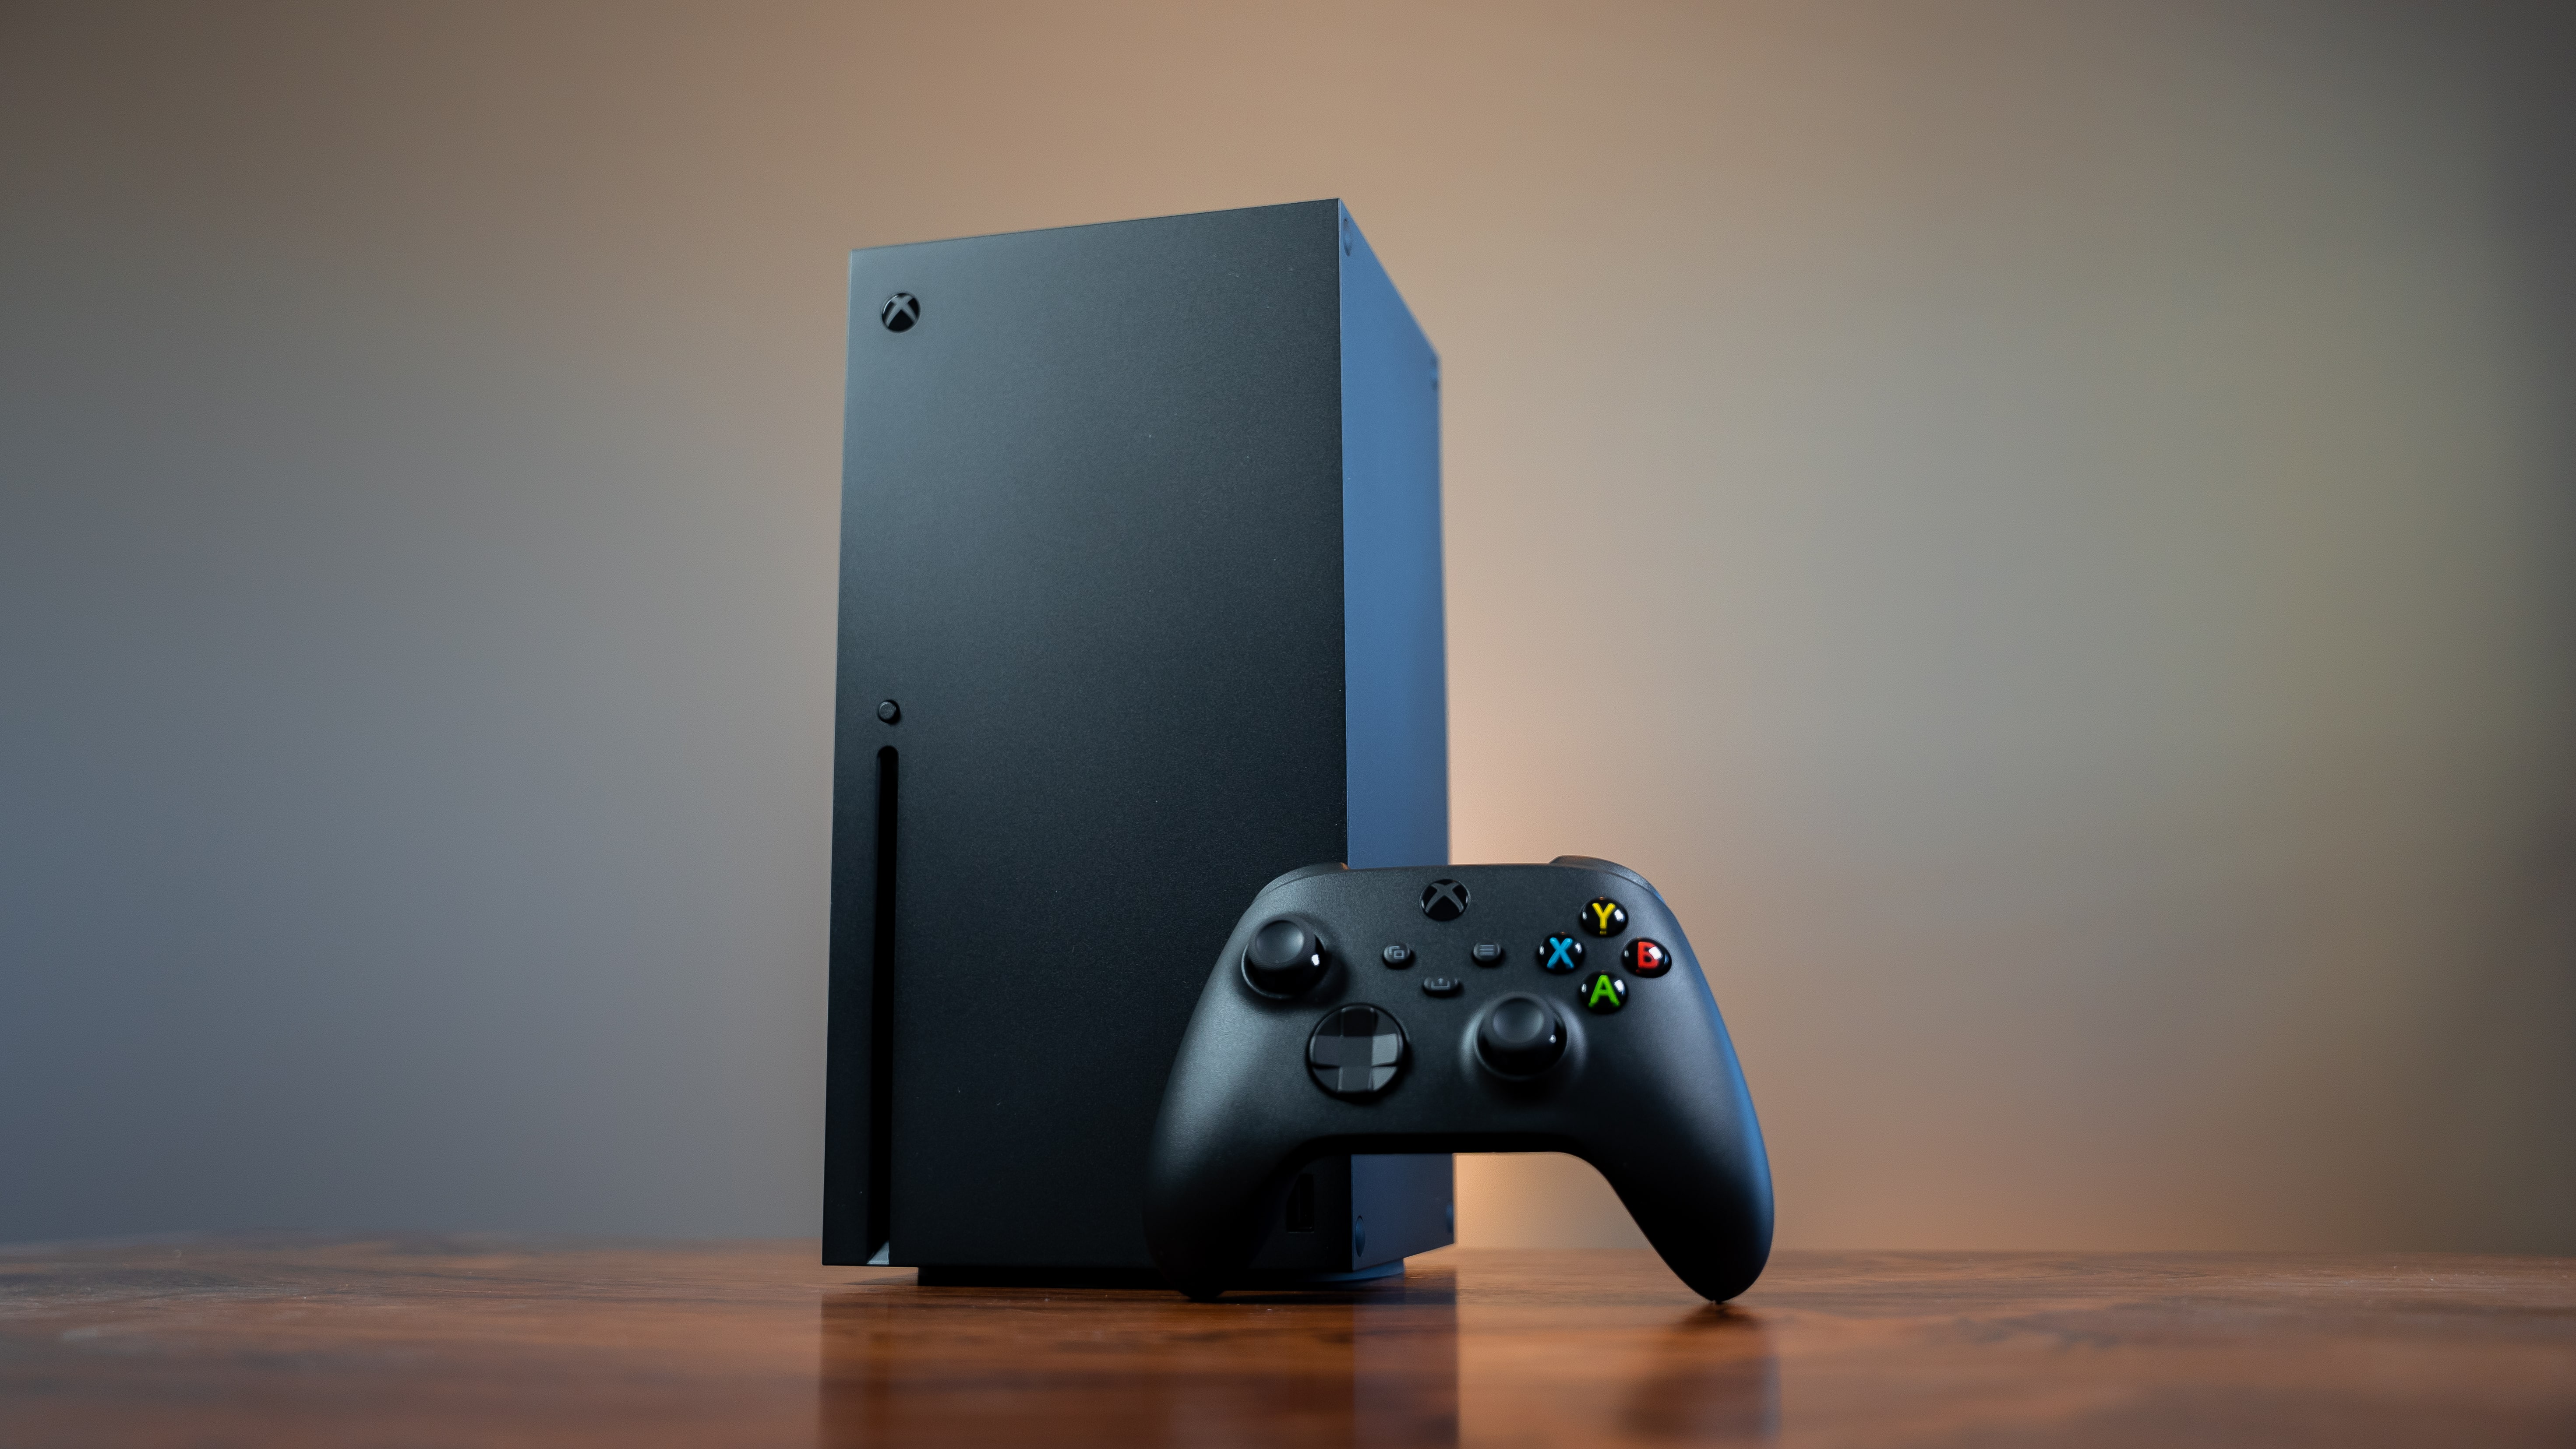 Looking up slightly at an Xbox Series X console with a controller leaning against the front.